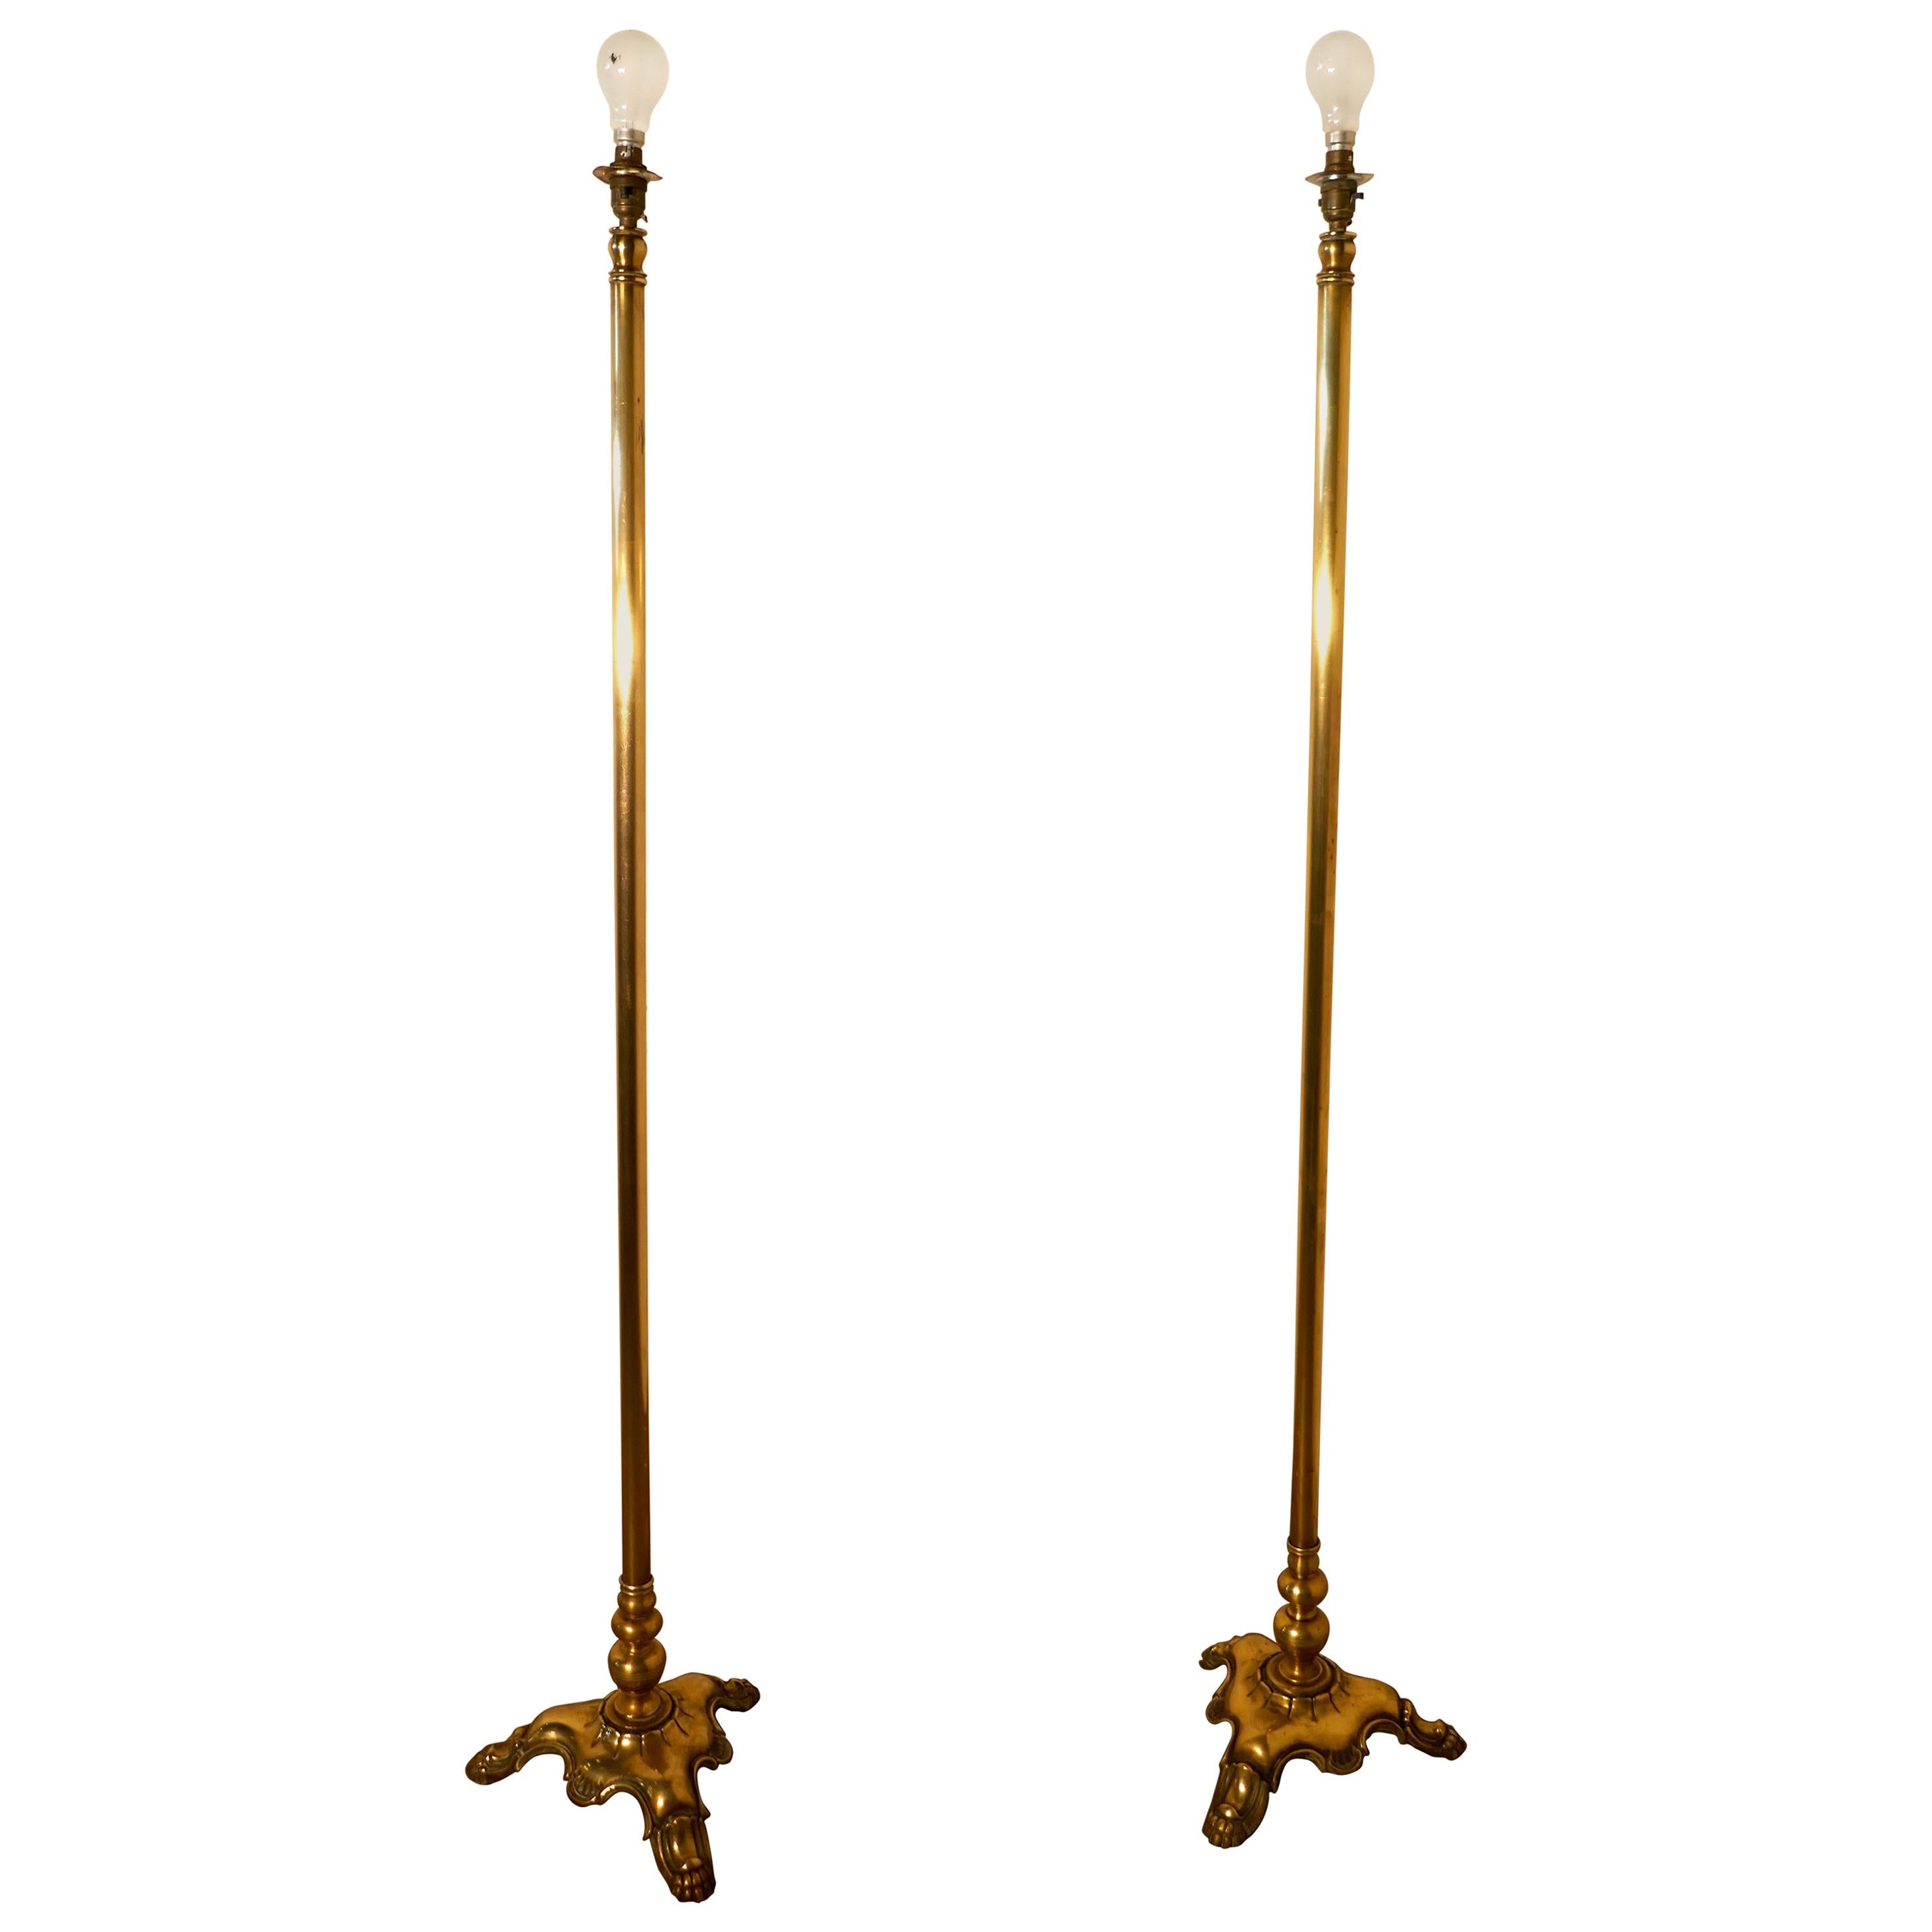 Pair of Tall Heavy Floor Lamps, Brass Arts & Crafts Standard Lamps